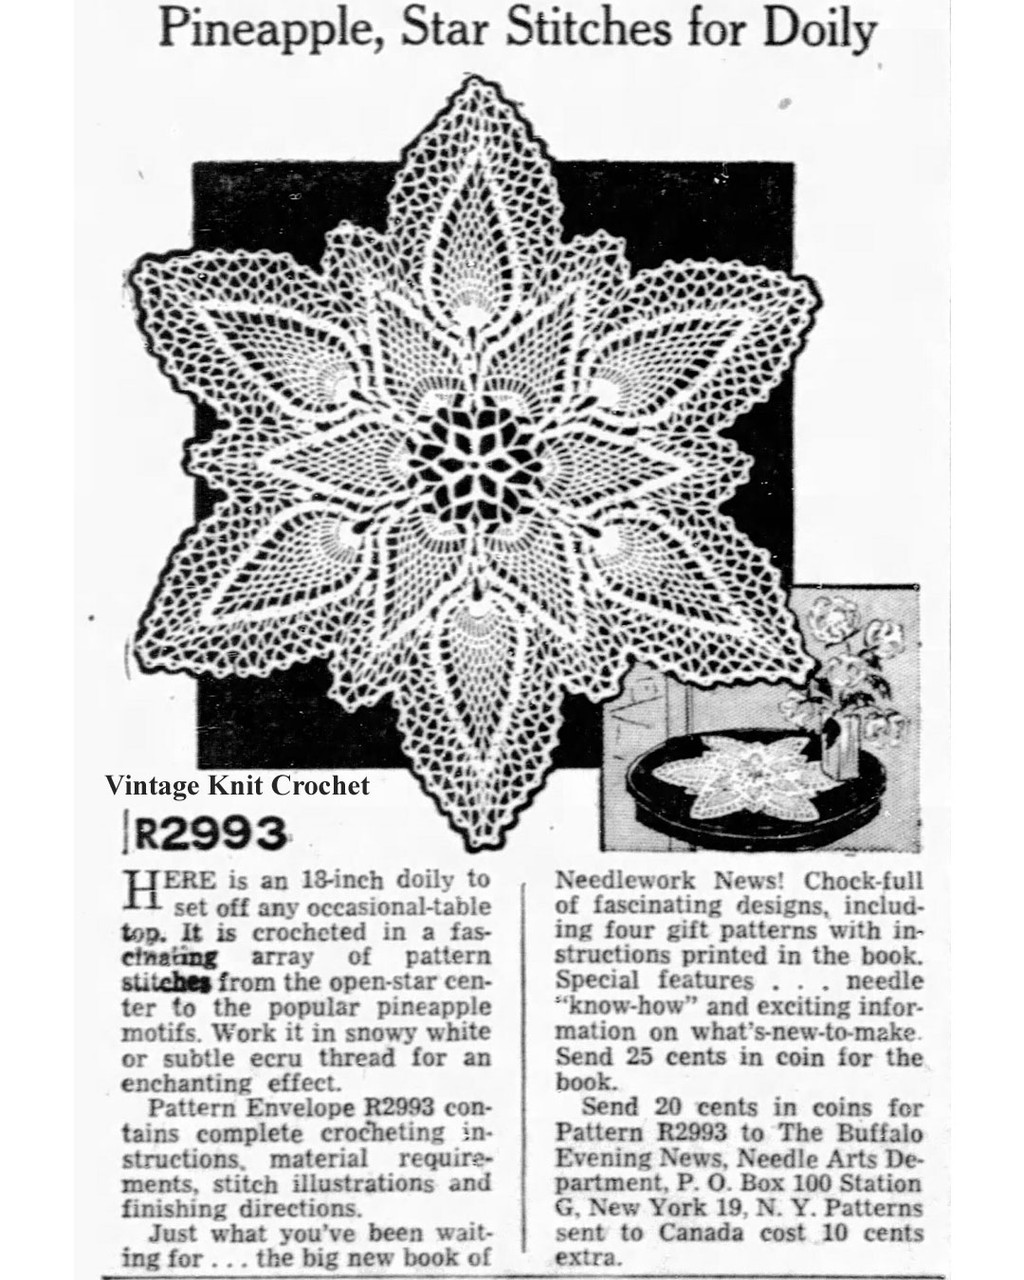 Mail Order No 2993 Crocheted Pineapple Star Doily Newspaper Advertisement 